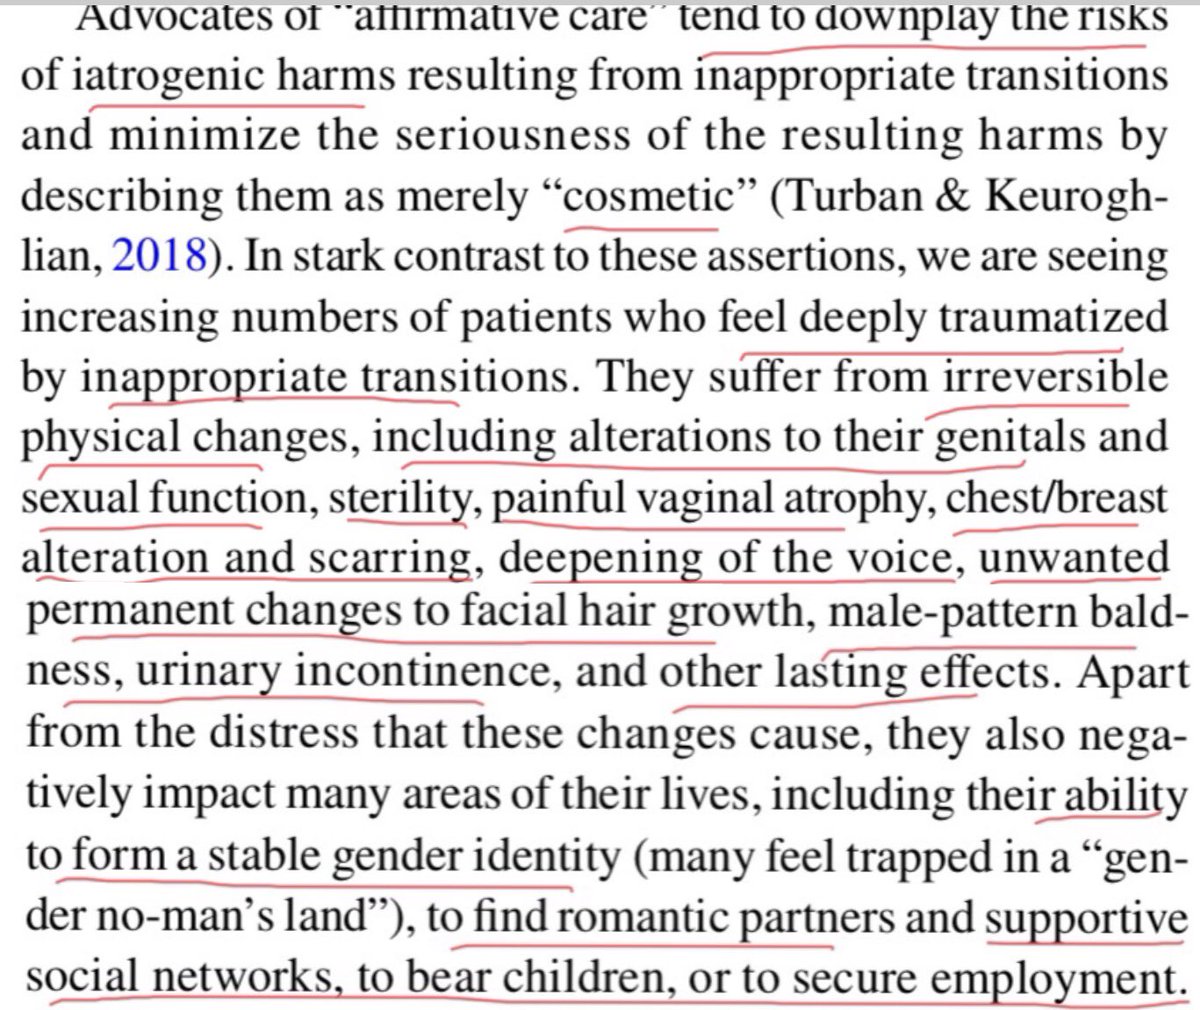 These are some of the changes which detransitioners are left with if we are overly hasty. We should also be cognisant of risks for people who are happily transitioned. More caution in setting on this path, more research for those that have done so...